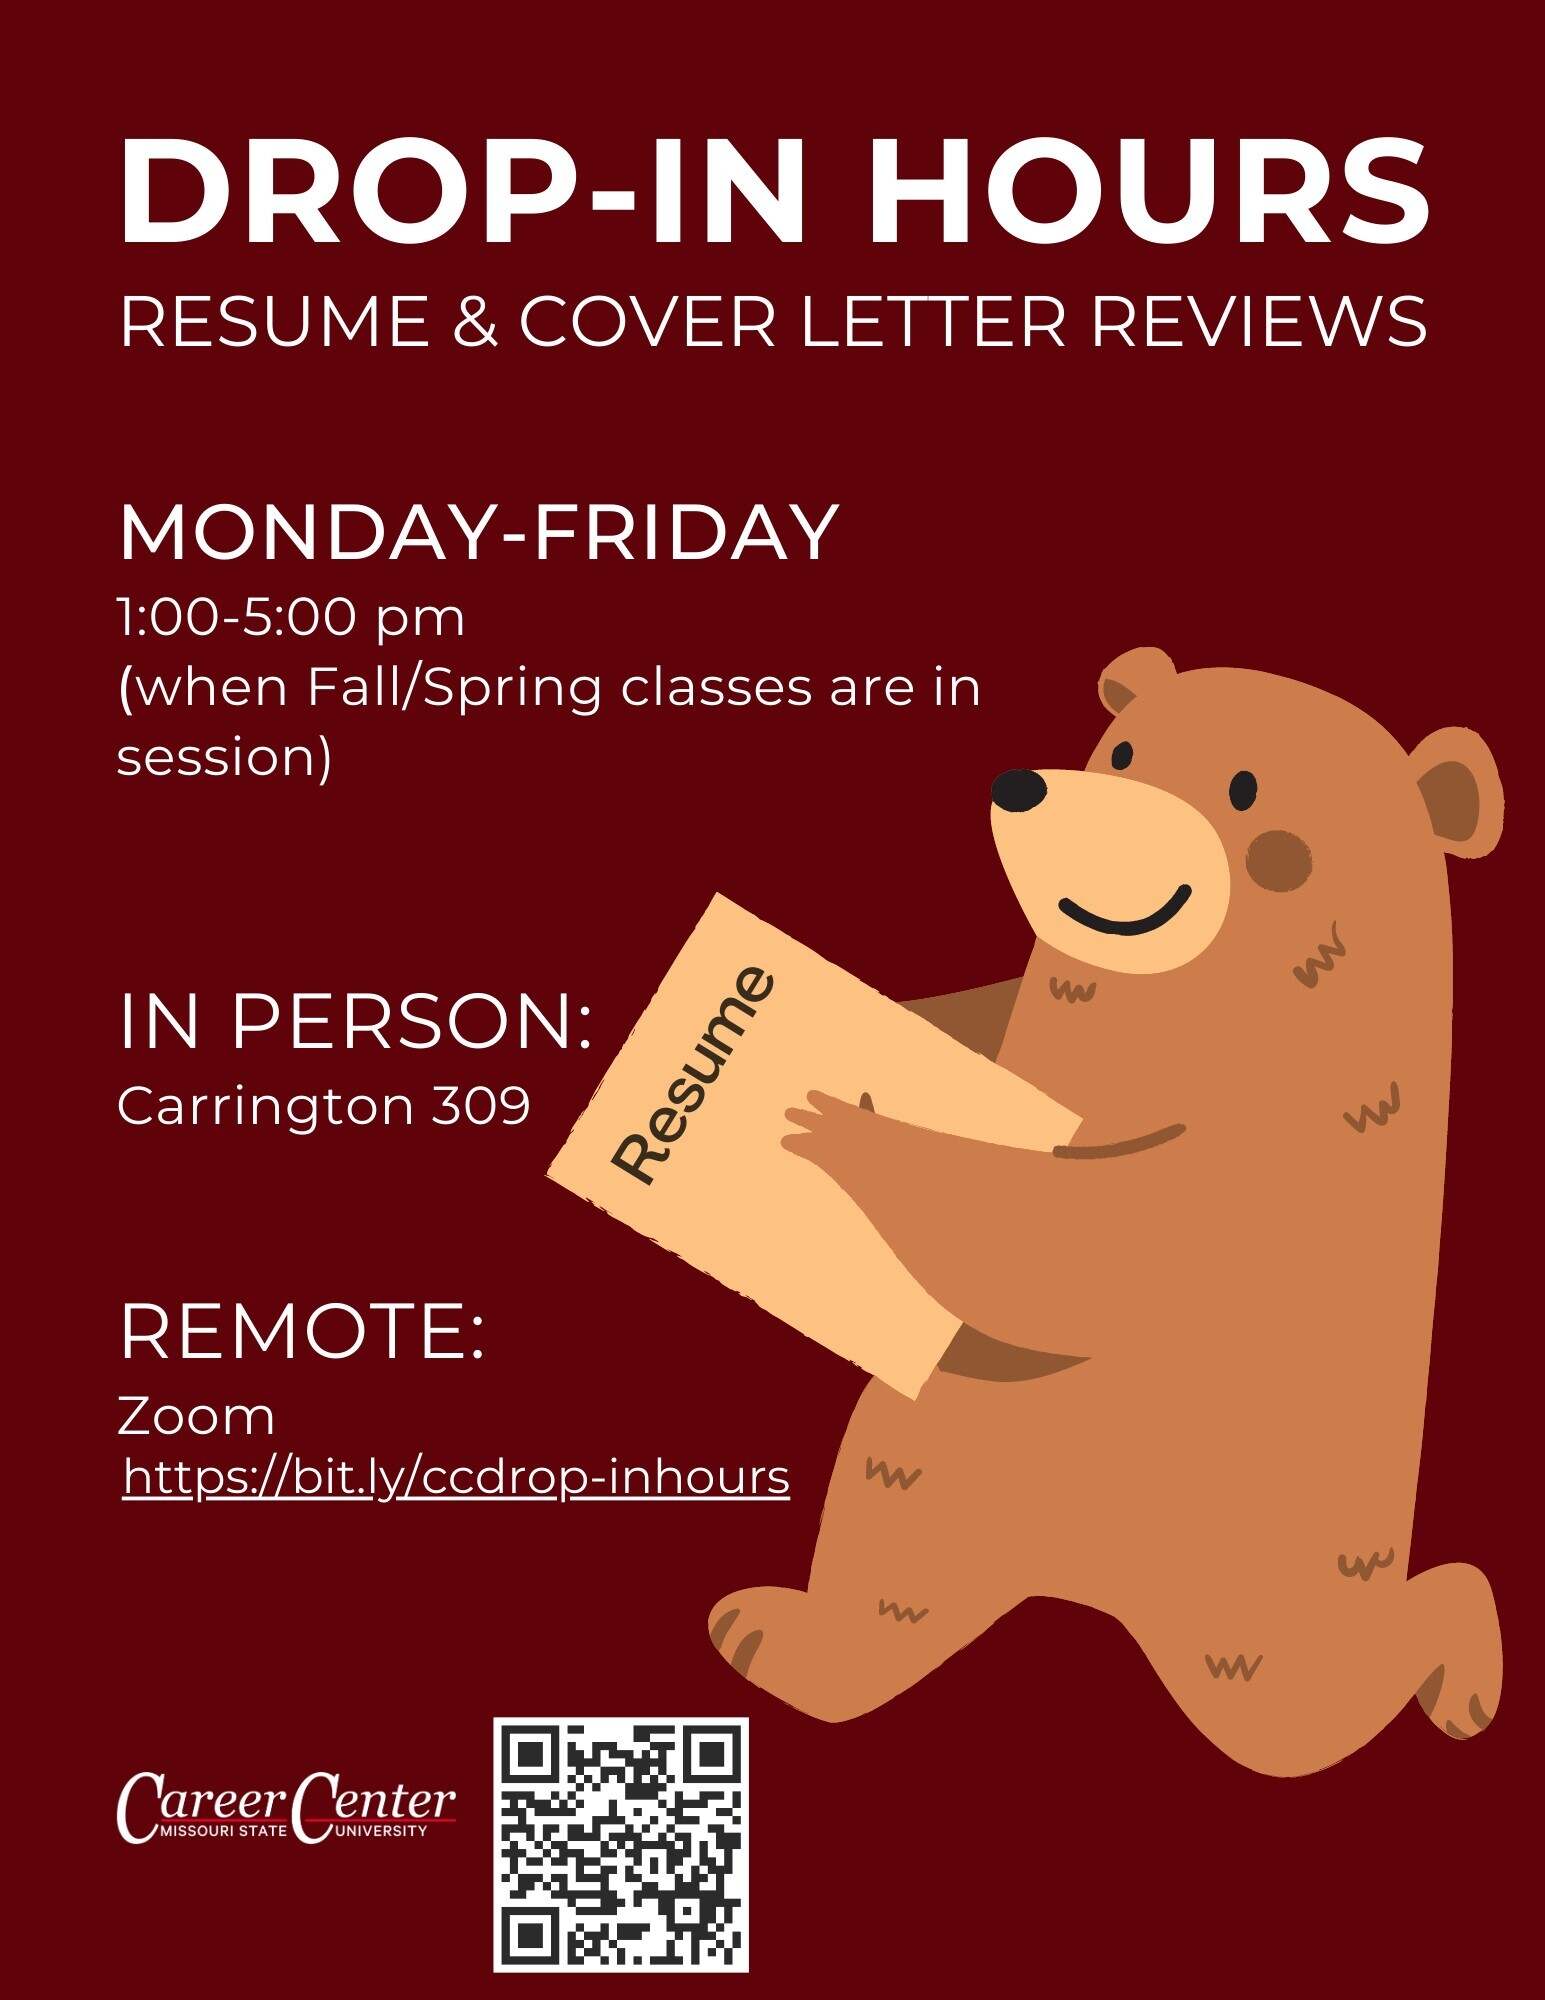 Hours for Career Center drop in resume review. 1-5pm when classes are in session.